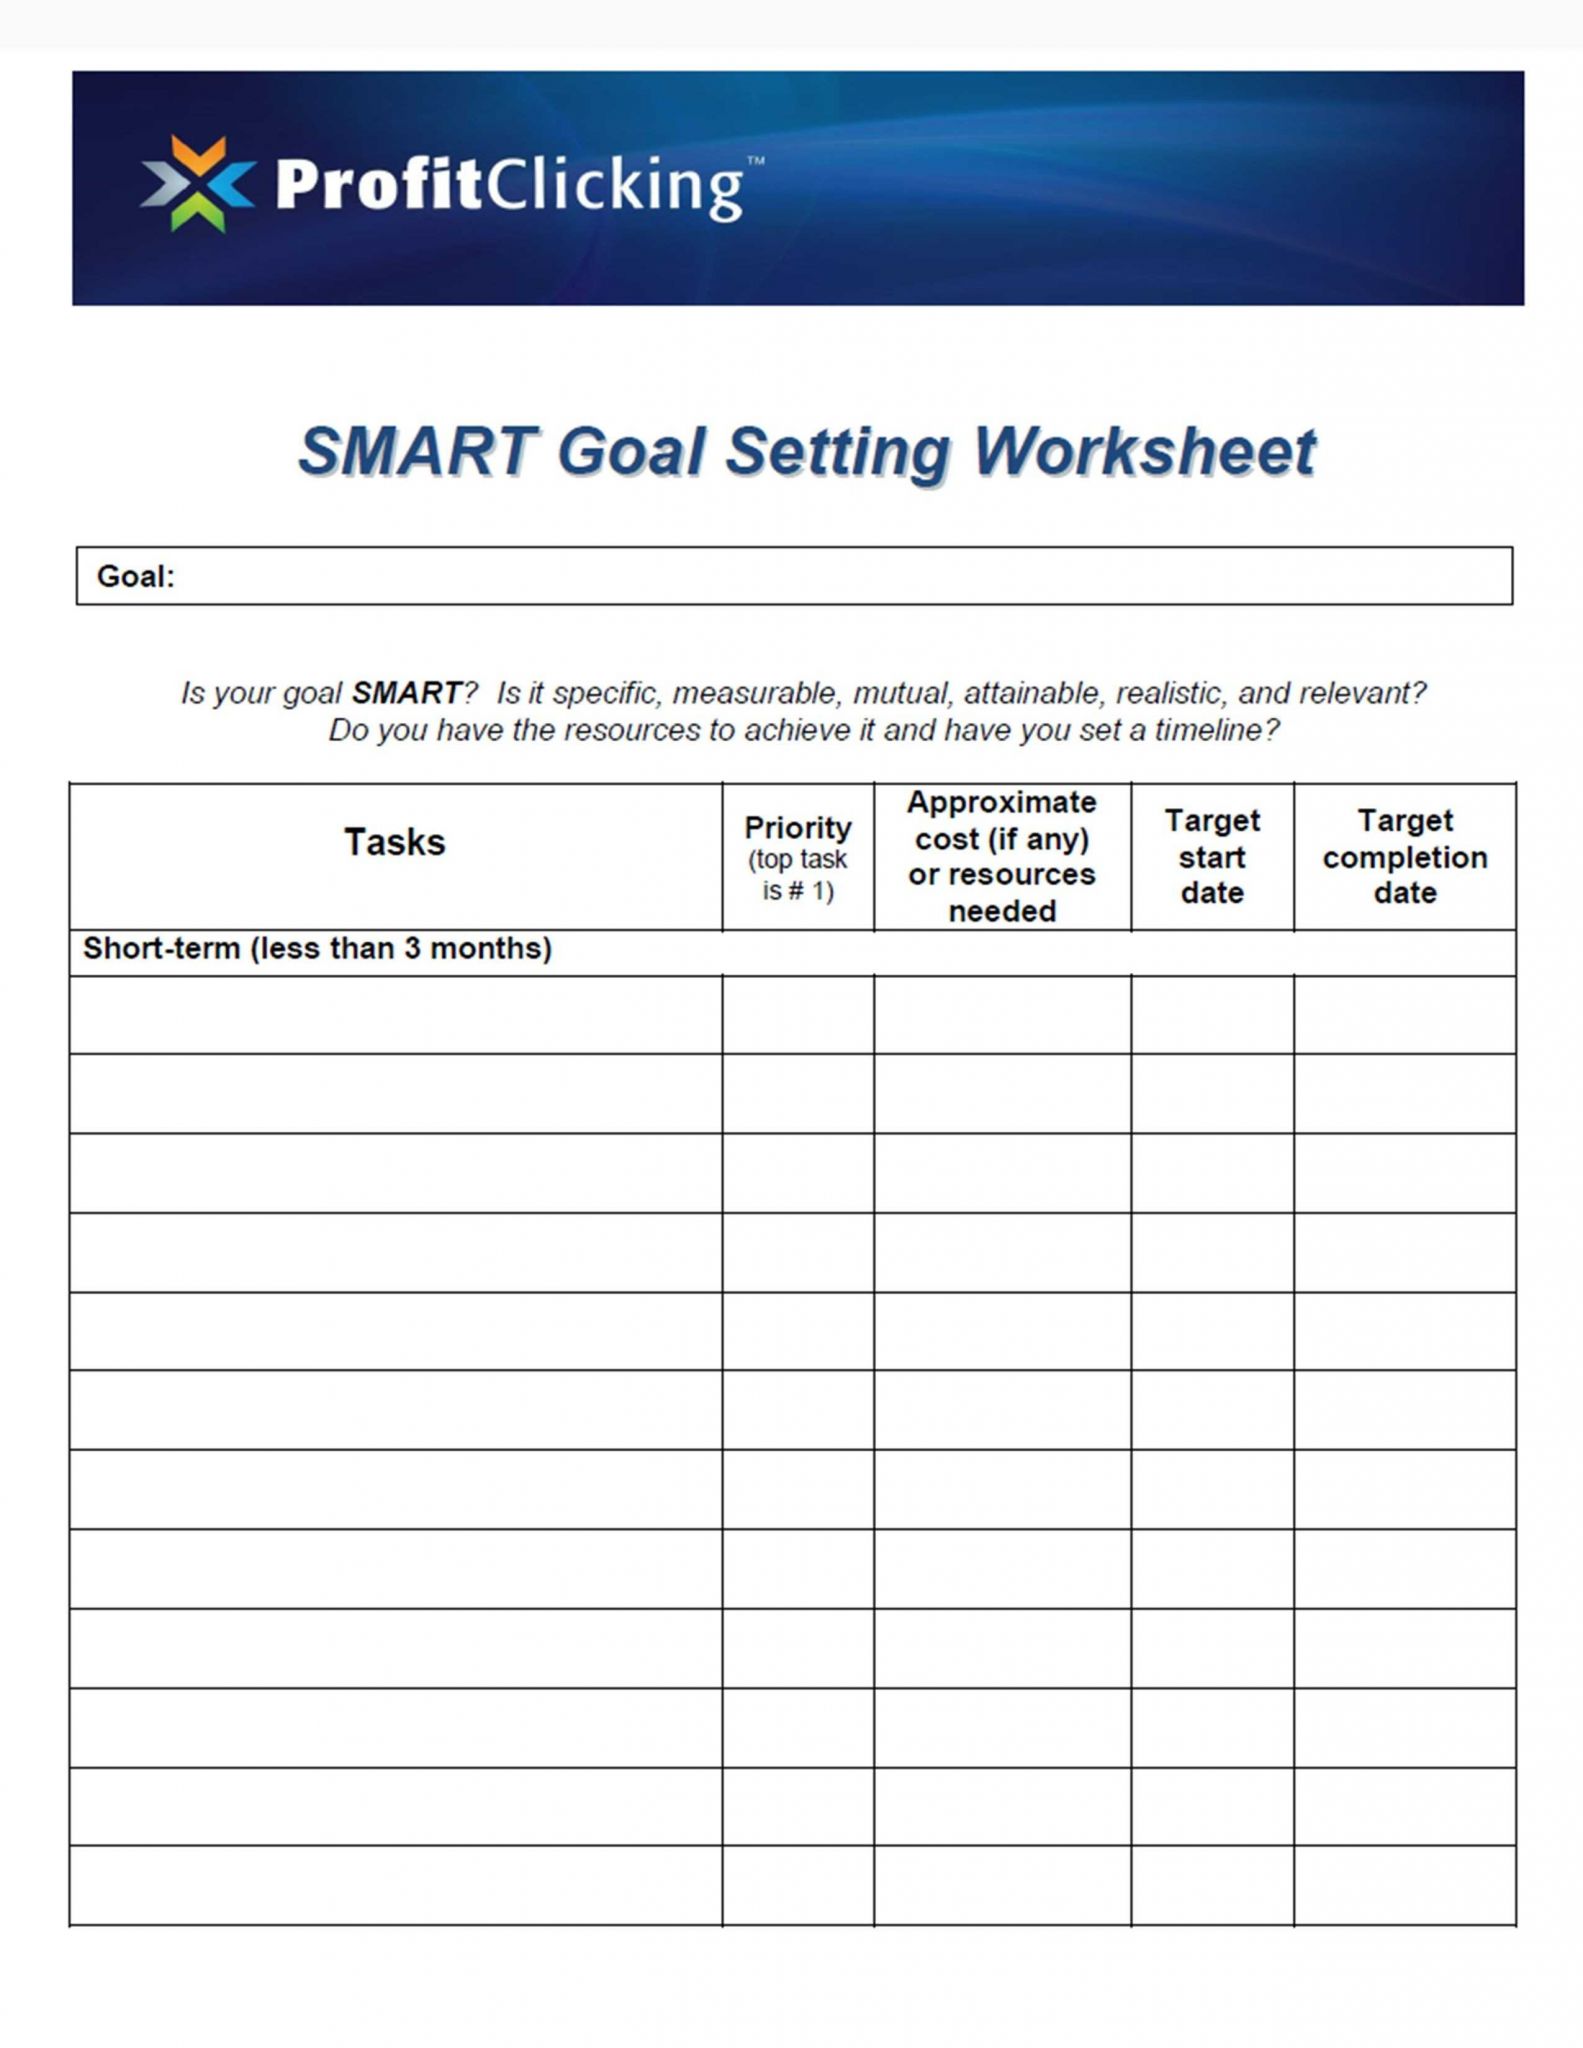 Dbt therapy Worksheets with Goal Setting Worksheet therapy Save Smart Goals Worksheet 1 Goals